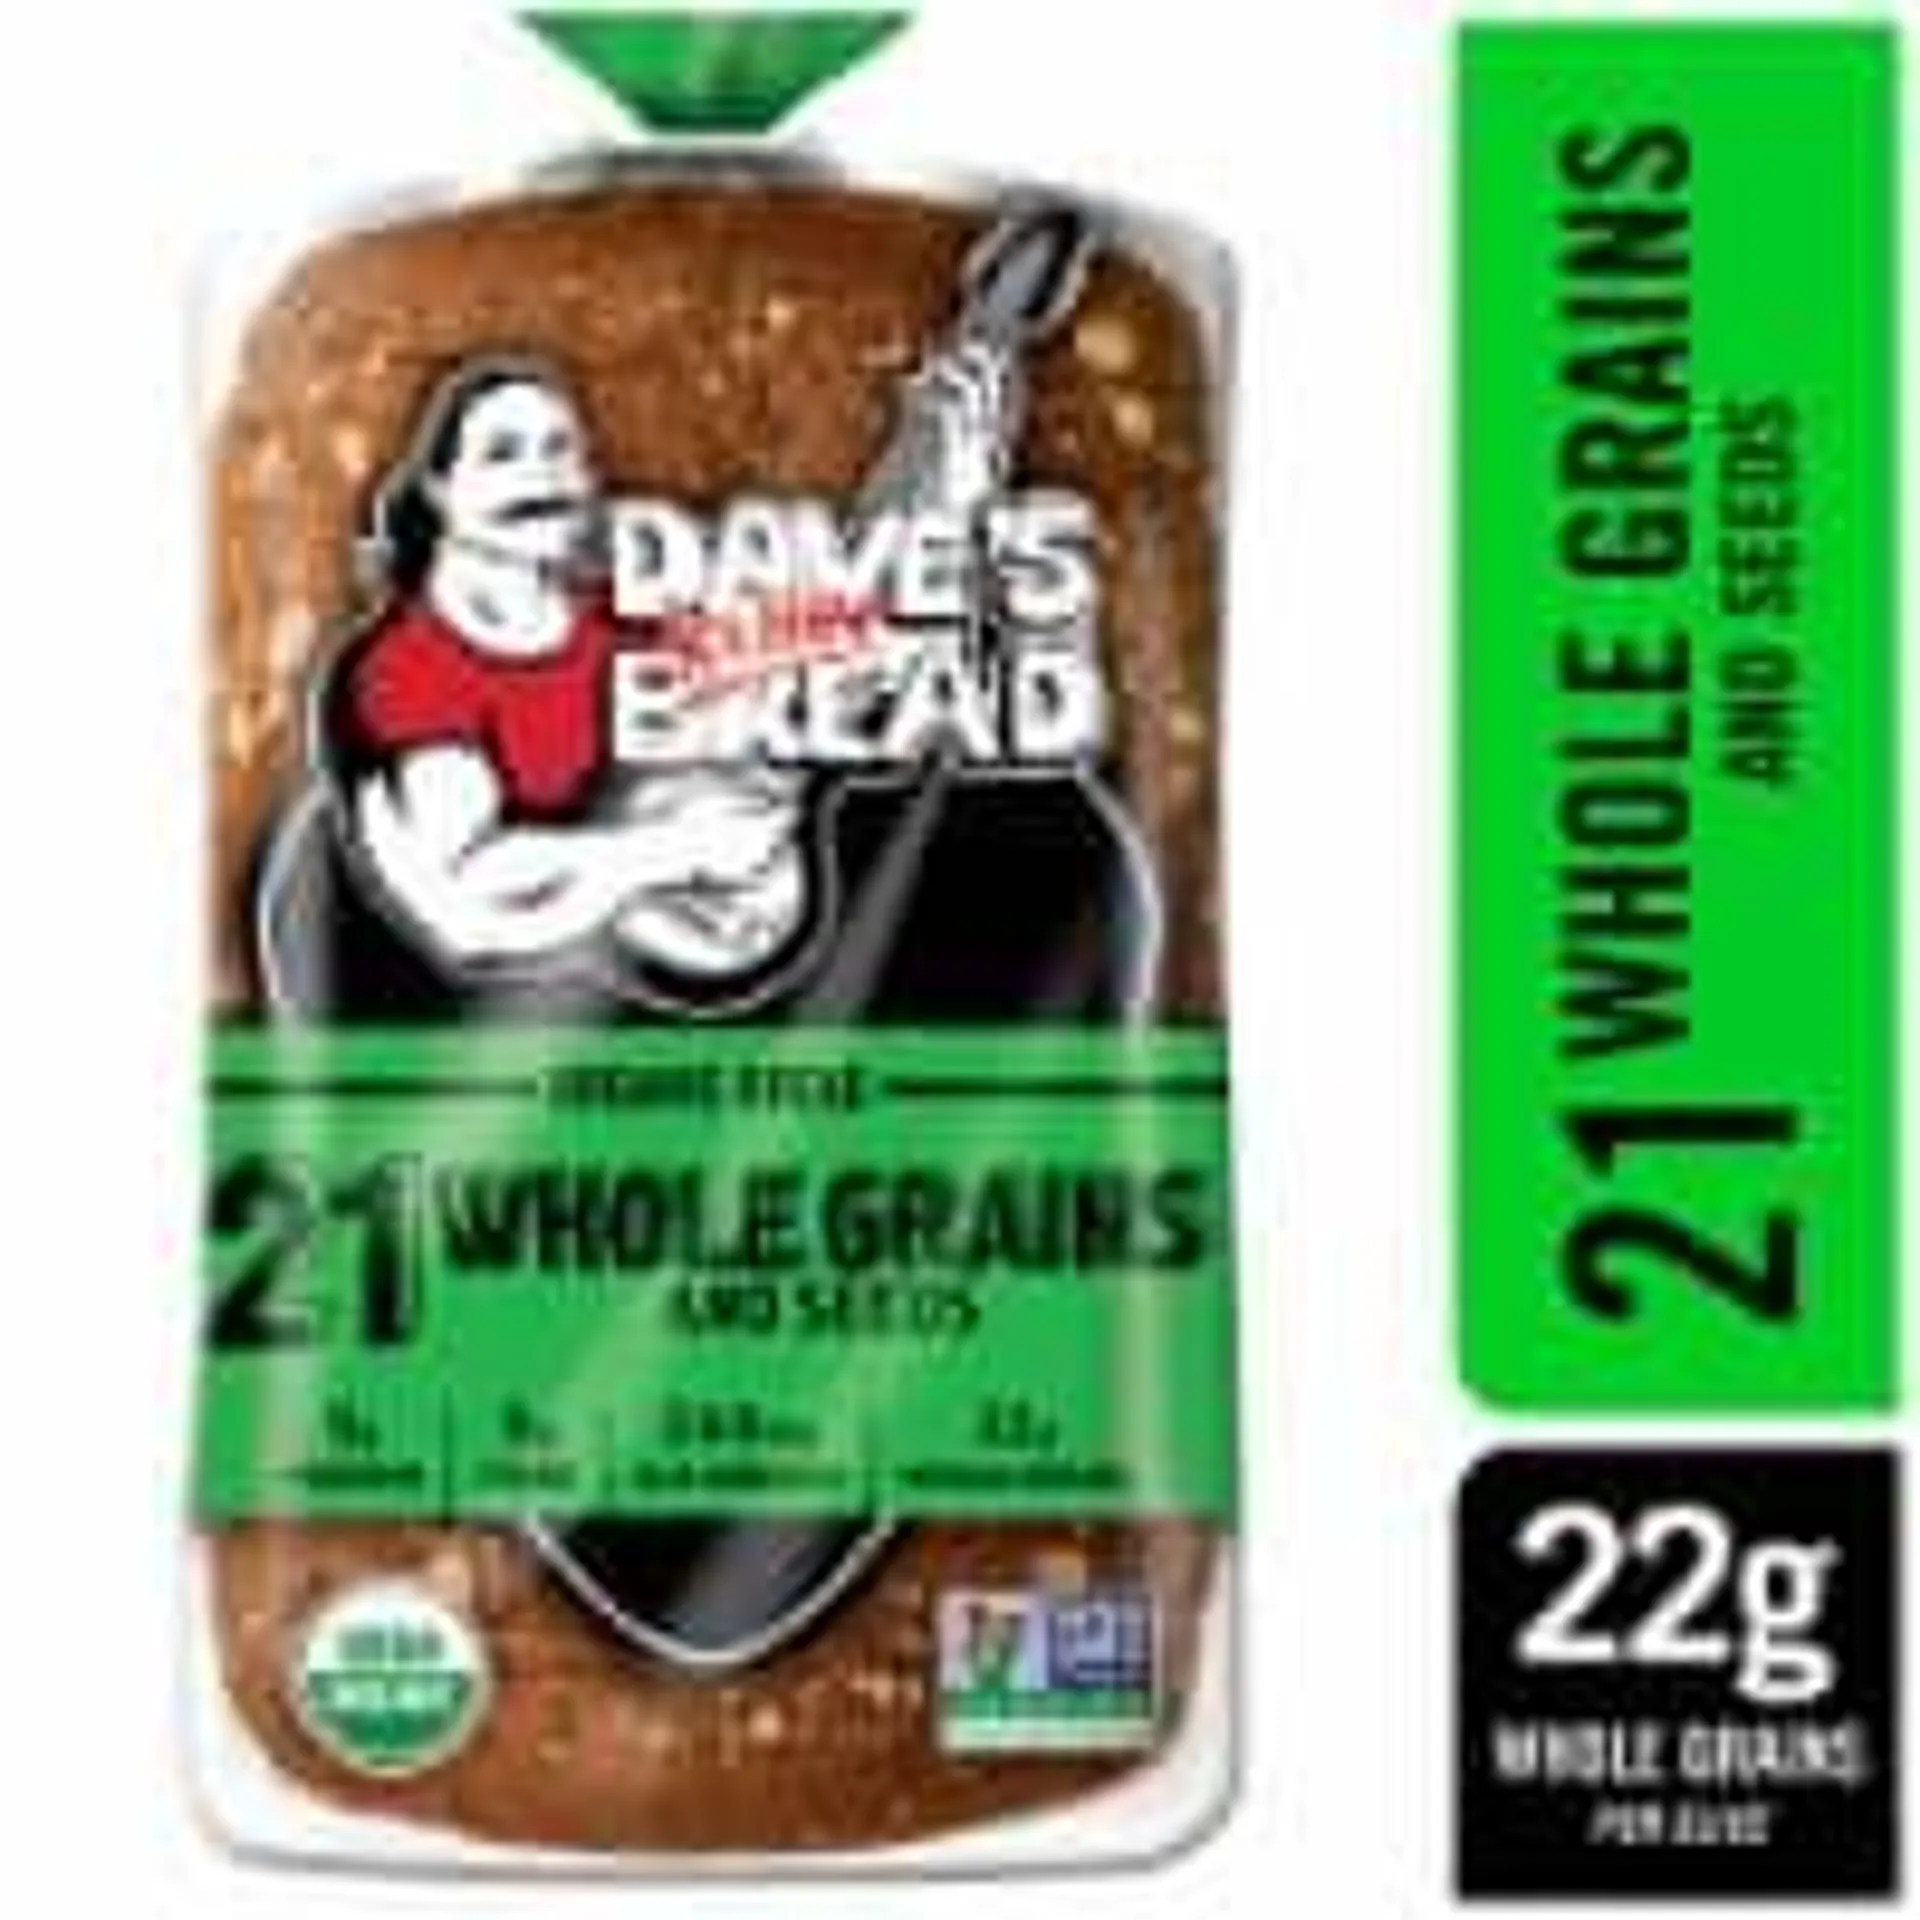 Dave's Killer Bread 21 Whole Grains and Seeds Organic Whole Grain Bread